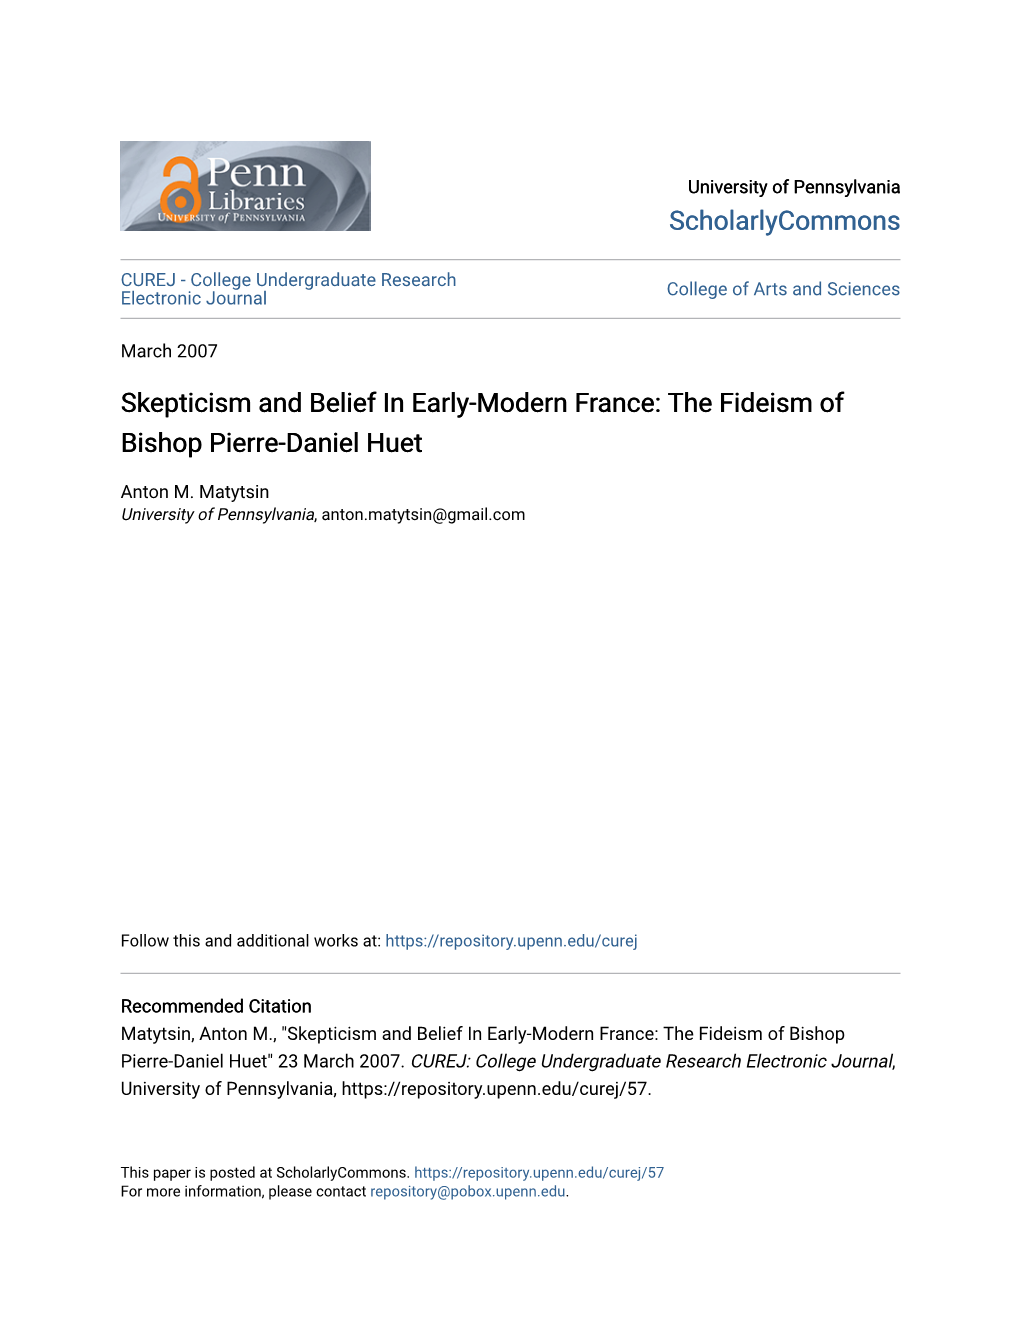 Skepticism and Belief in Early-Modern France: the Fideism of Bishop Pierre-Daniel Huet